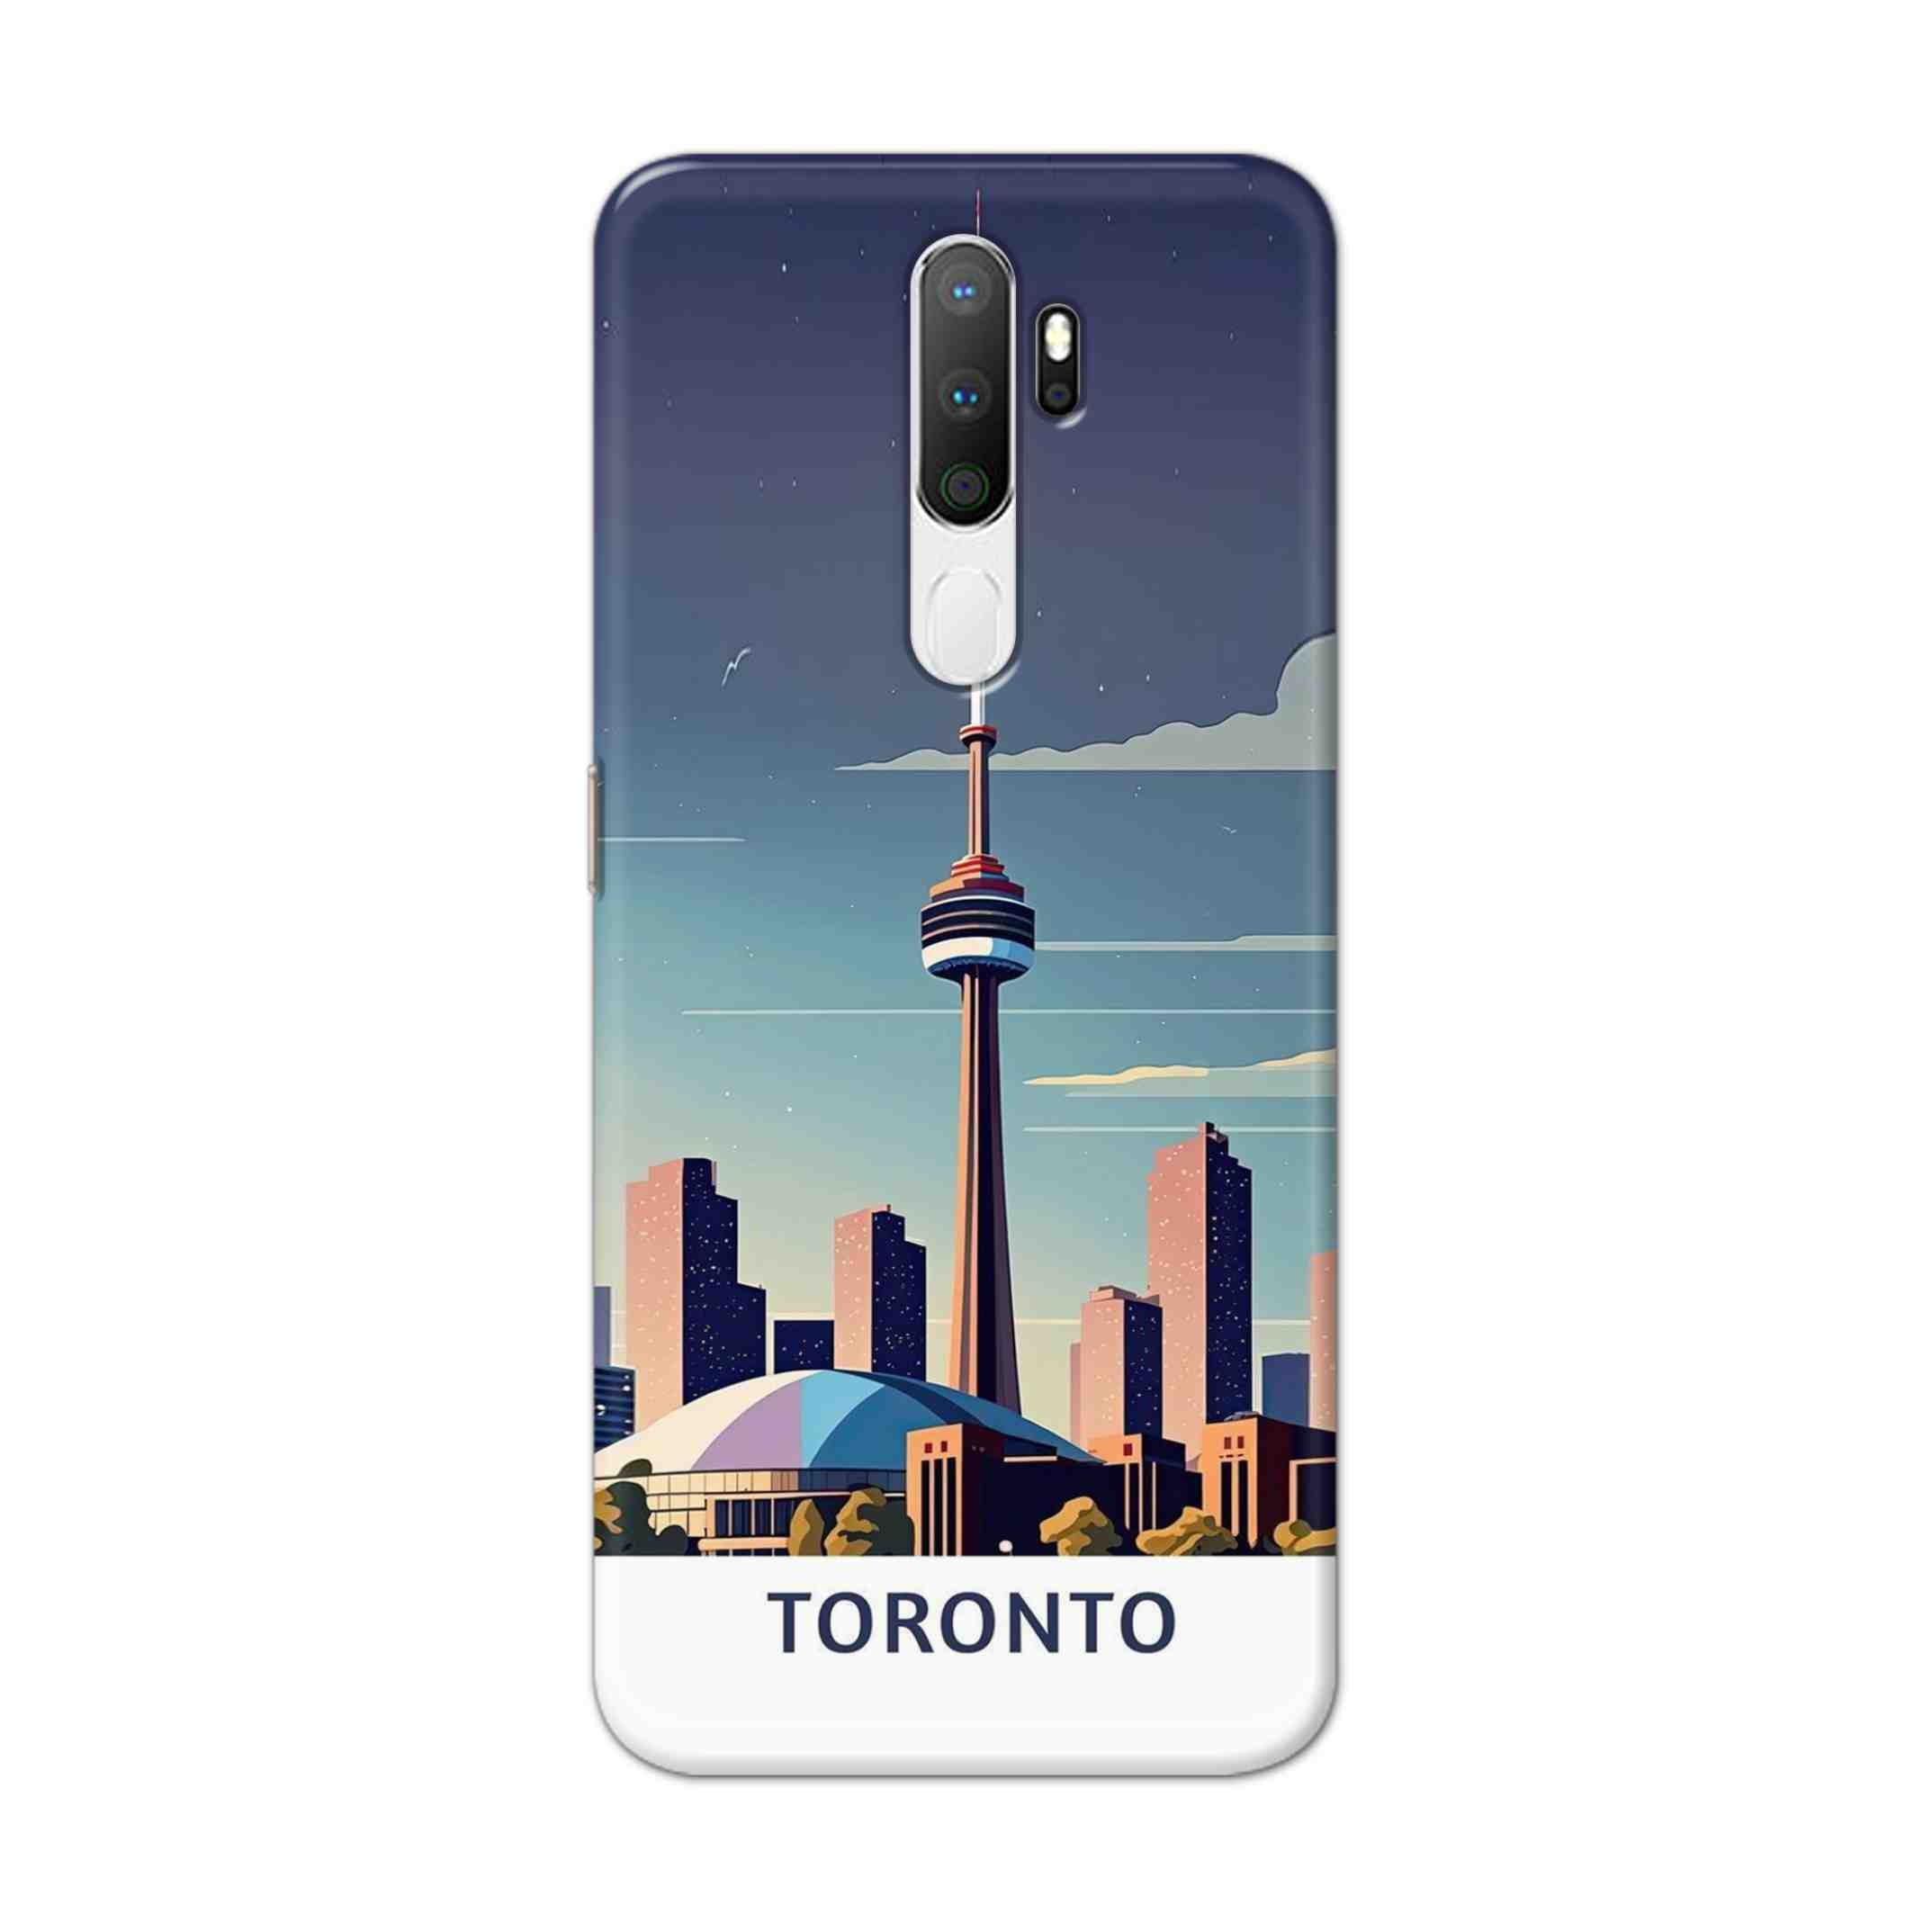 Buy Toronto Hard Back Mobile Phone Case Cover For Oppo A5 (2020) Online